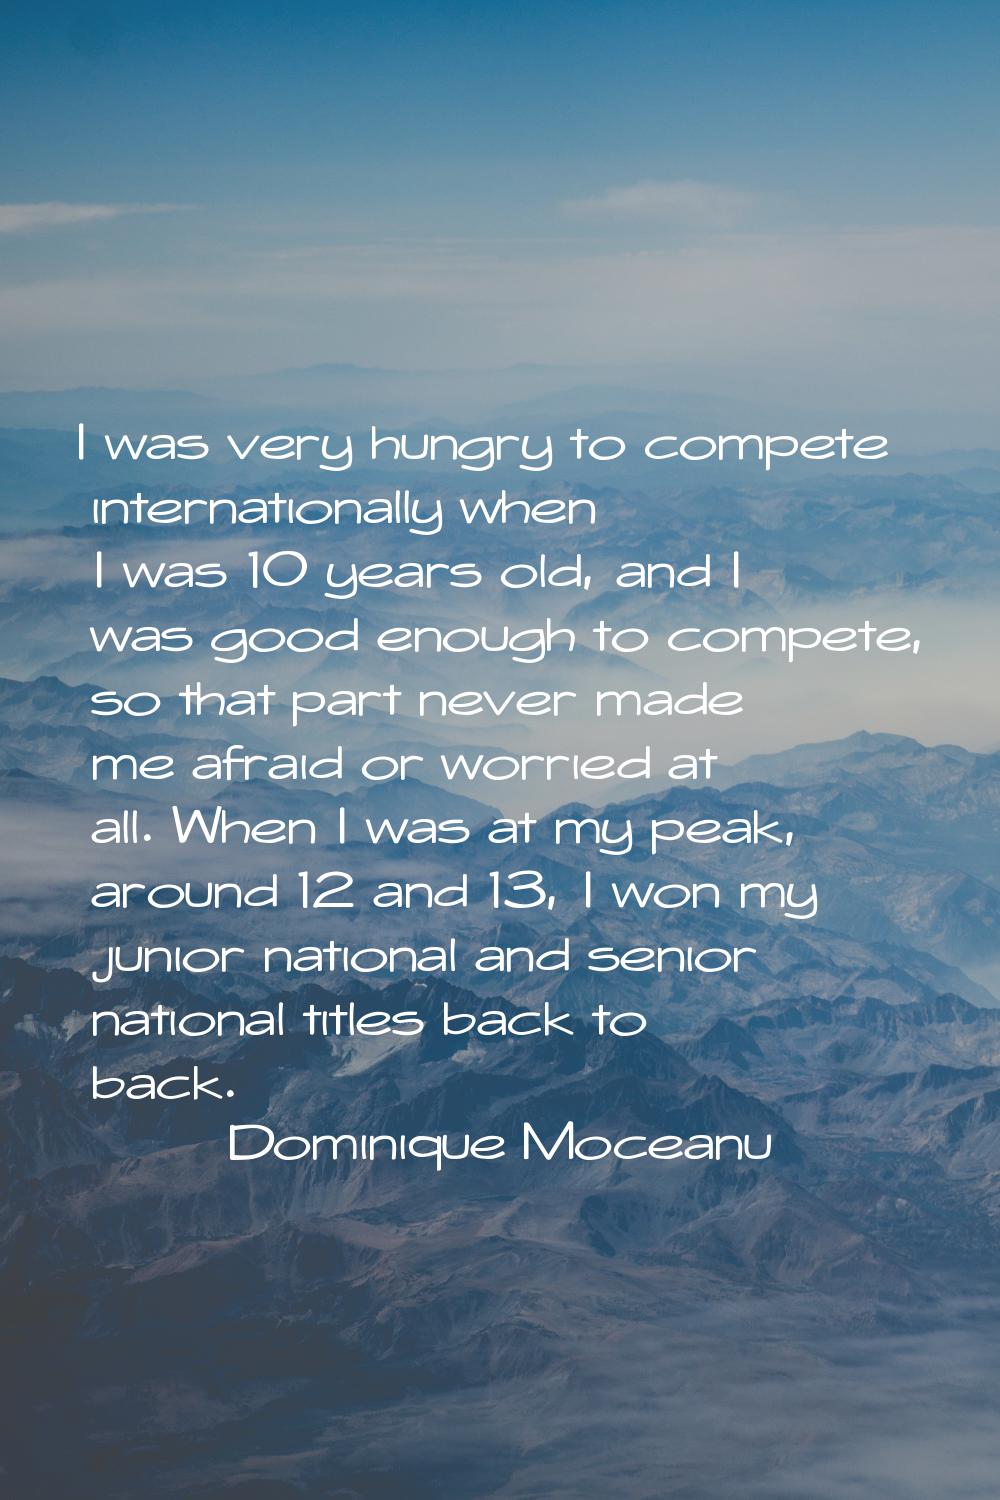 I was very hungry to compete internationally when I was 10 years old, and I was good enough to comp